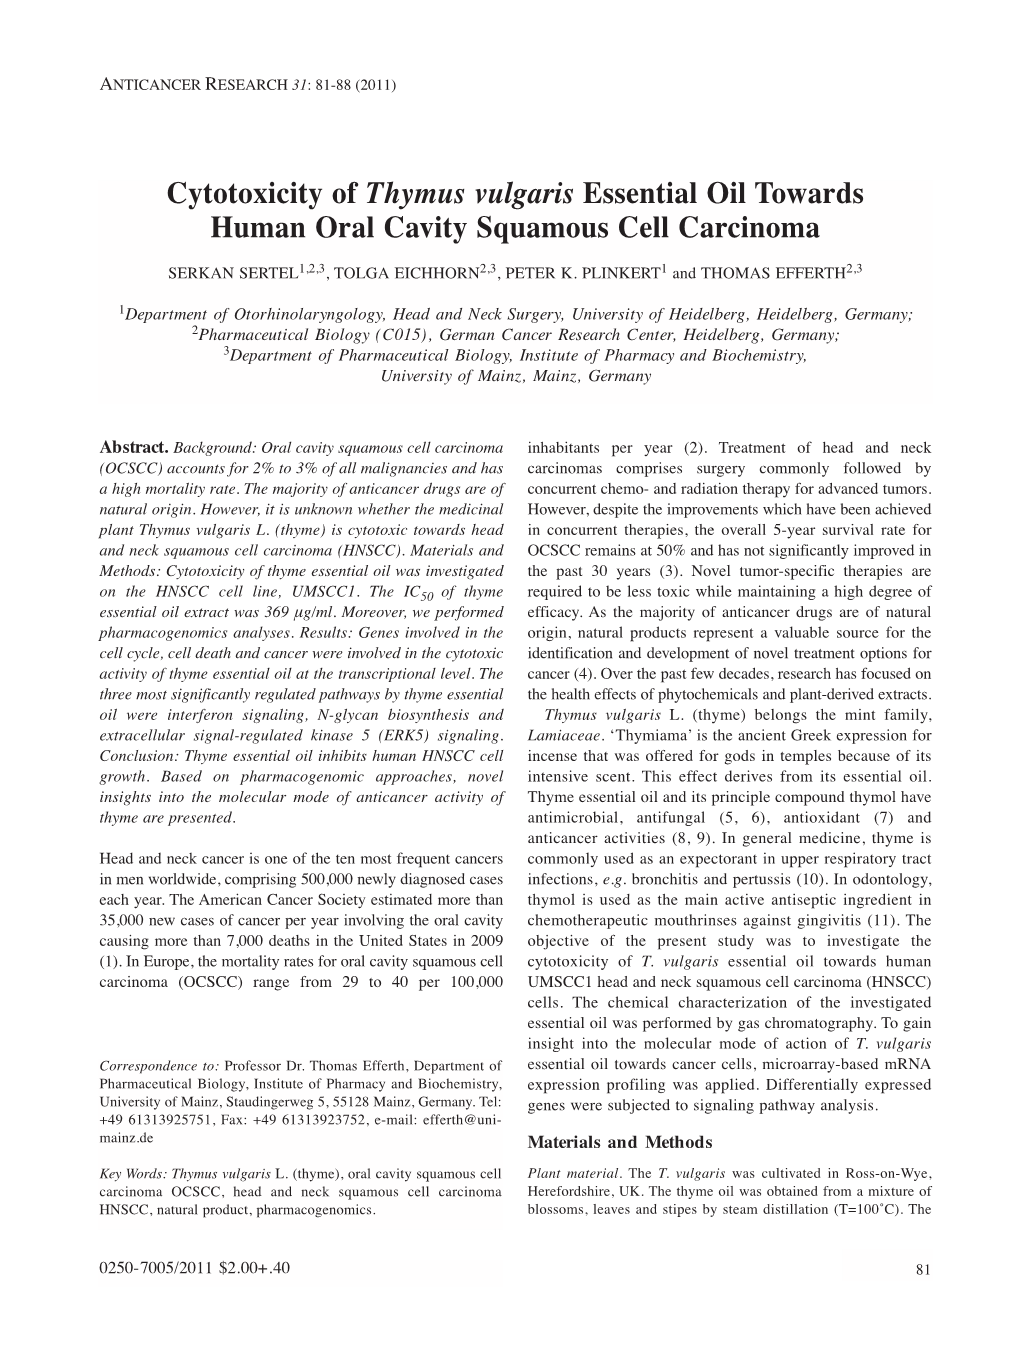 Cytotoxicity of Thymus Vulgaris Essential Oil Towards Human Oral Cavity Squamous Cell Carcinoma